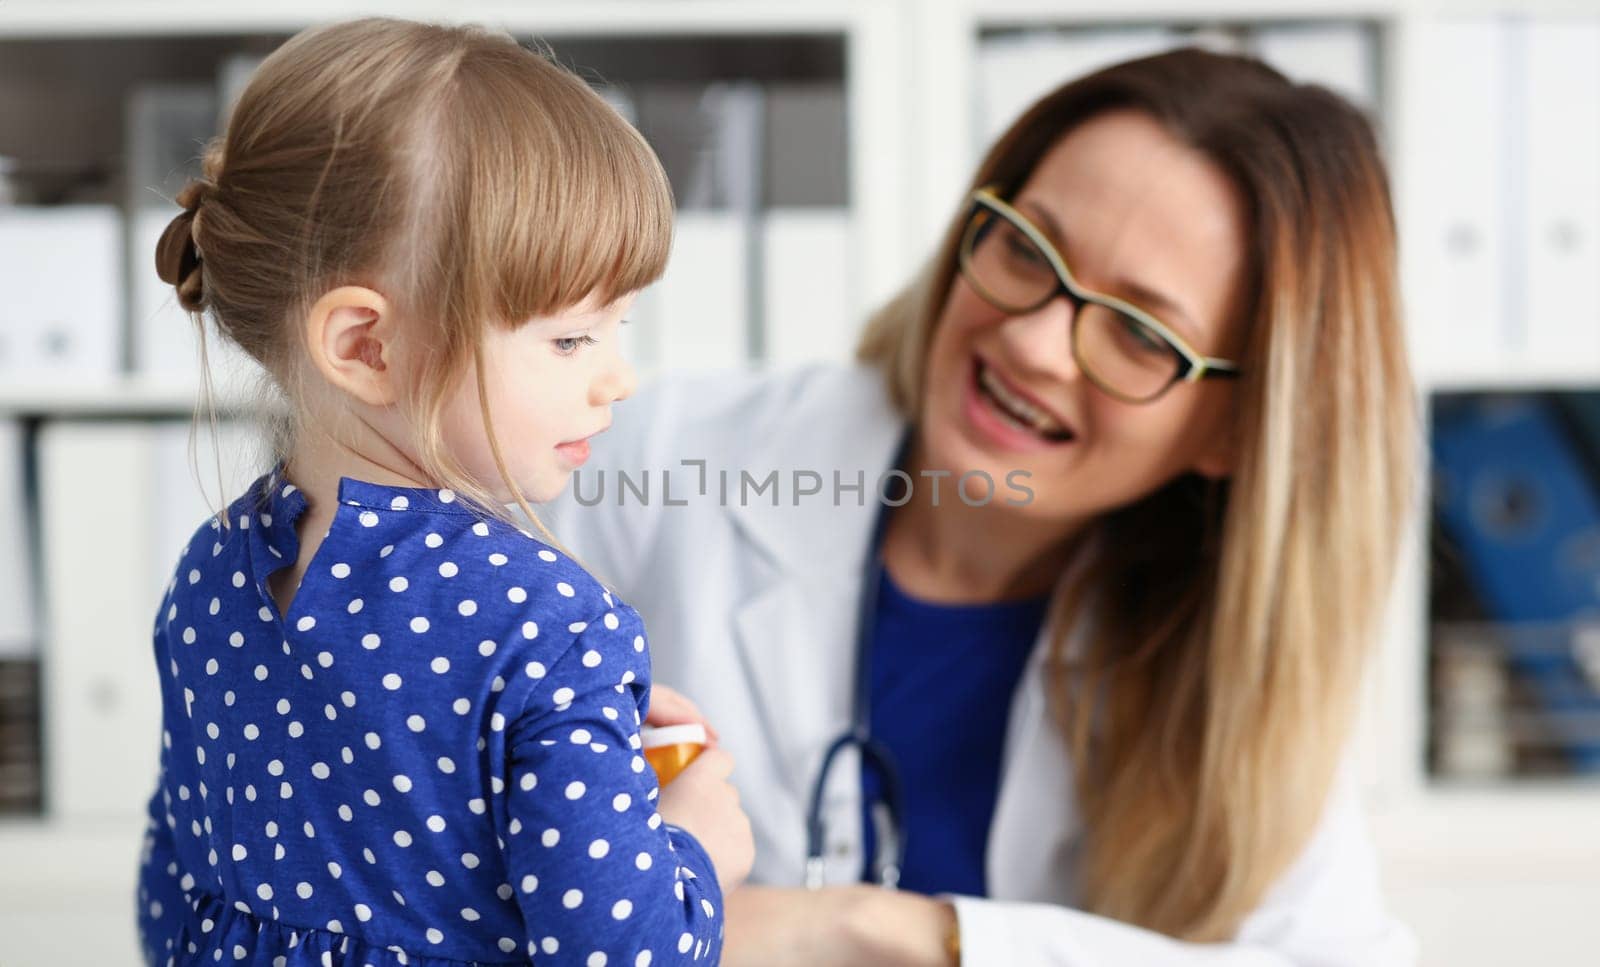 Little child with mother at pediatrician reception. Physical exam cute infant portrait baby aid healthy lifestyle ward round child sickness clinic test high quality and trust concept